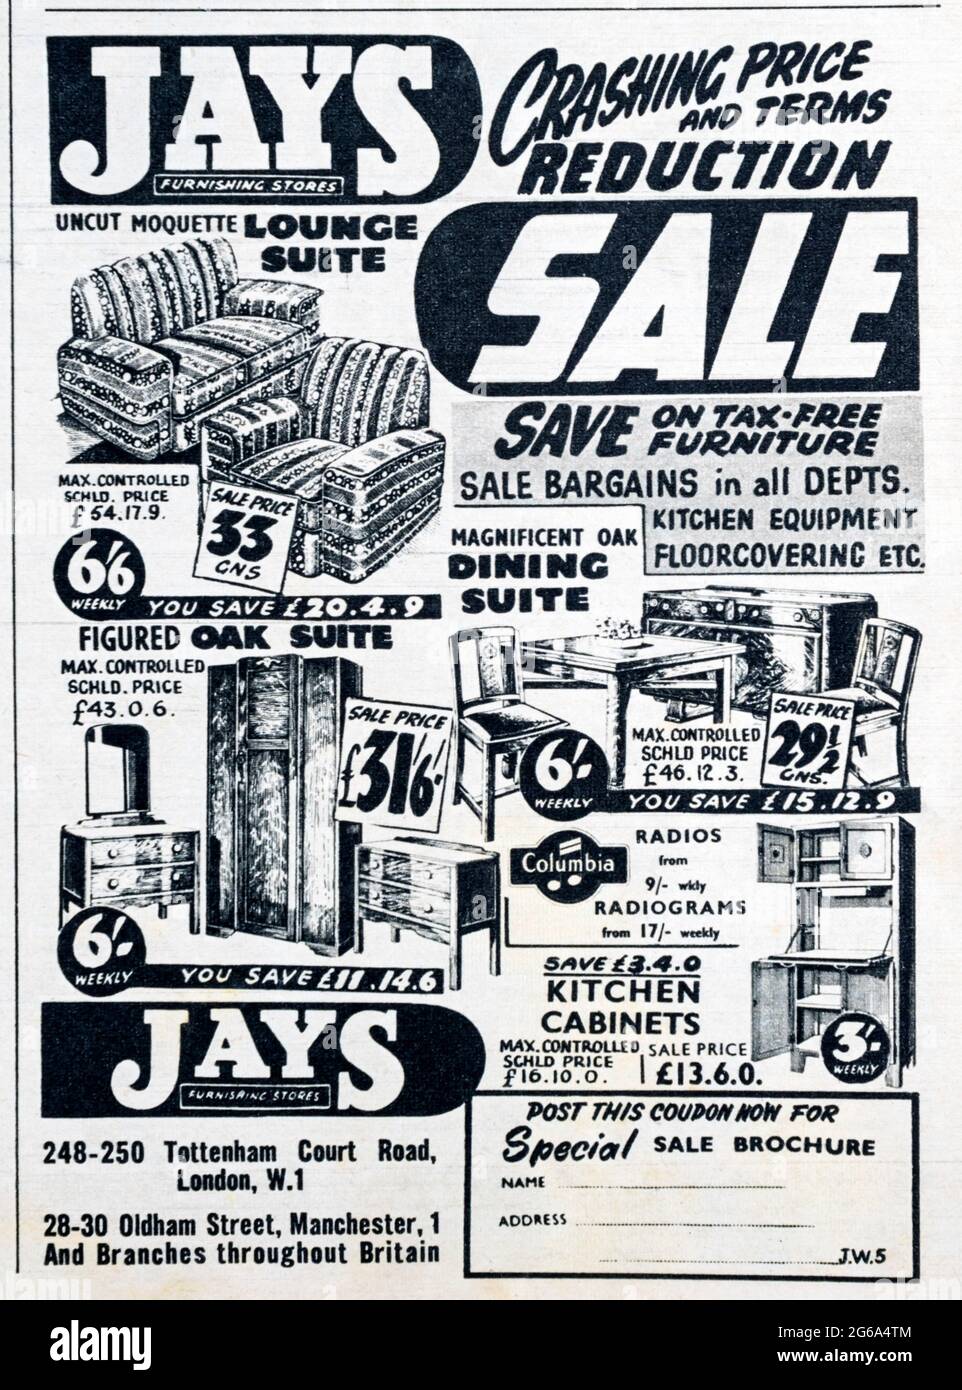 A 1950s magazine advertisement for Jays Furnishing Stores. Stock Photo